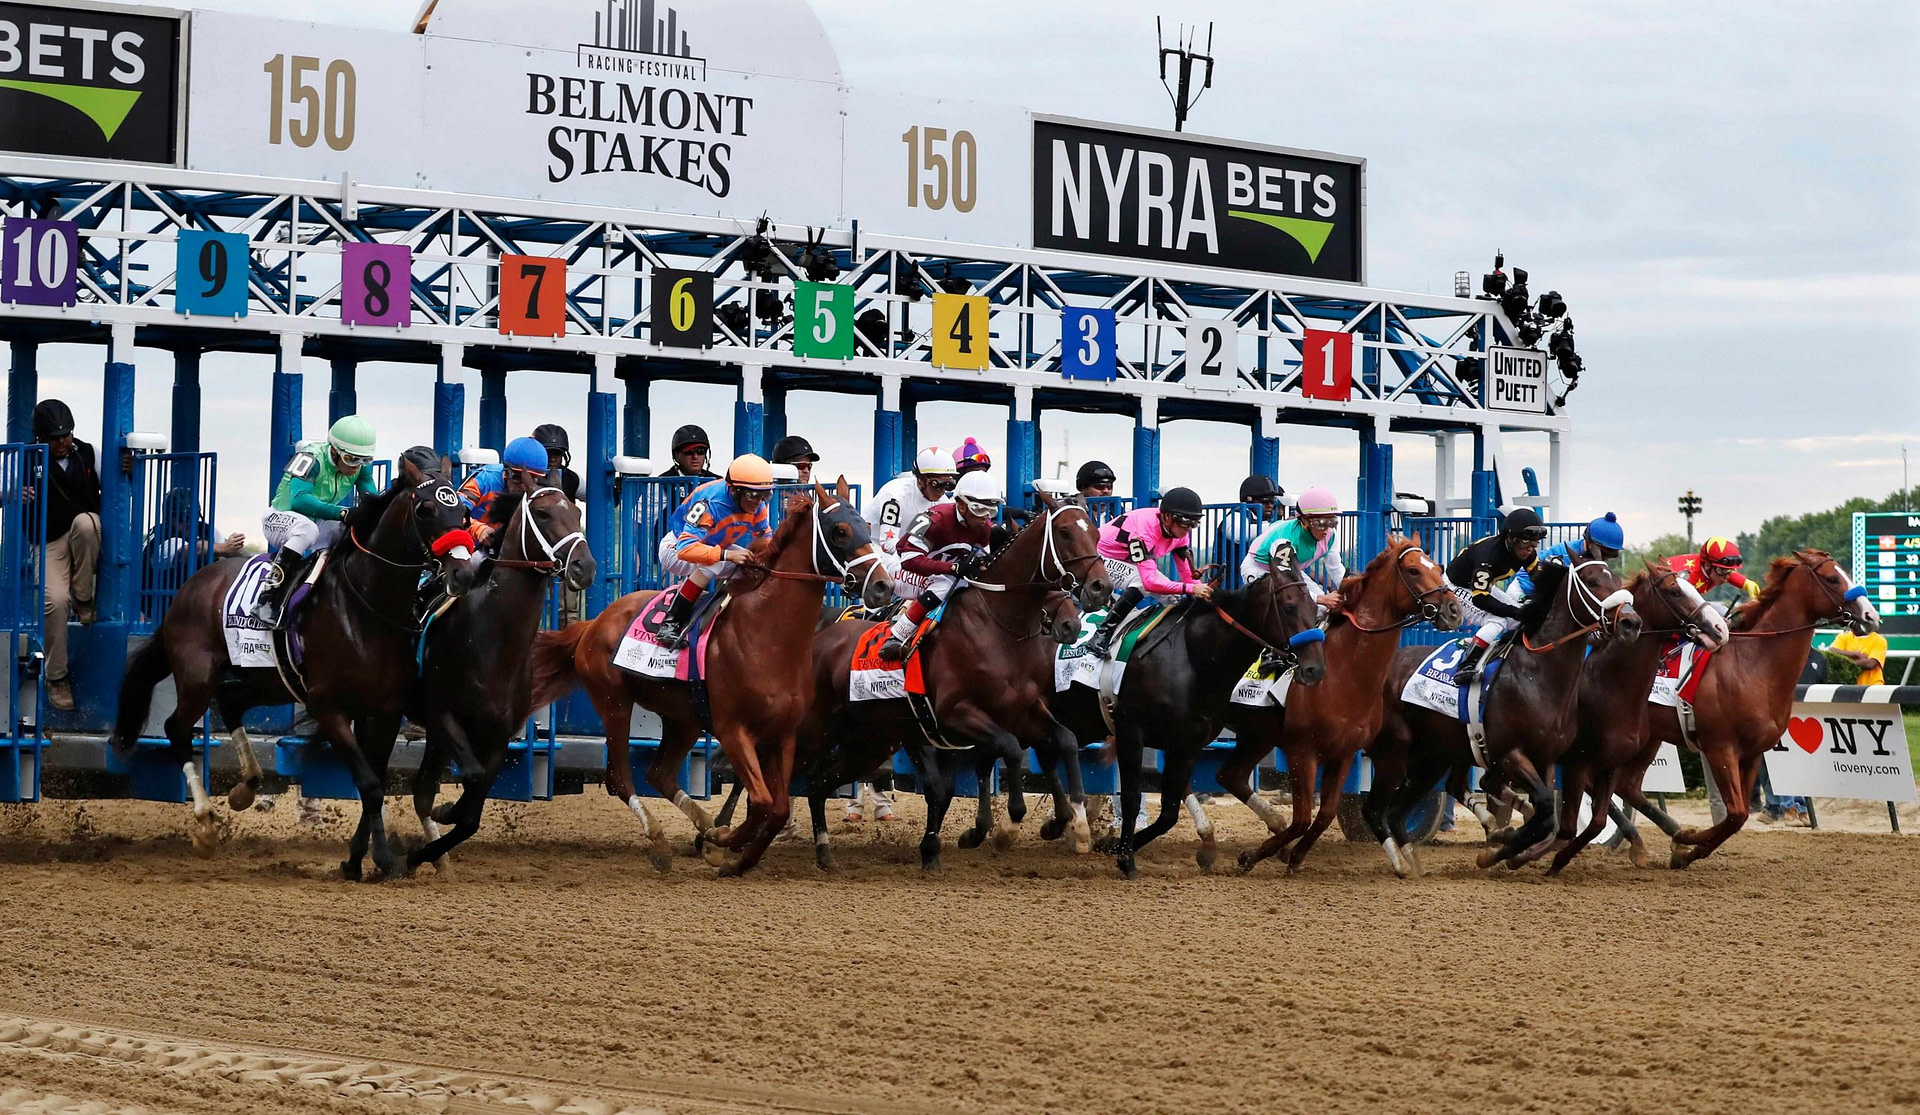 Belmont Stakes Odds